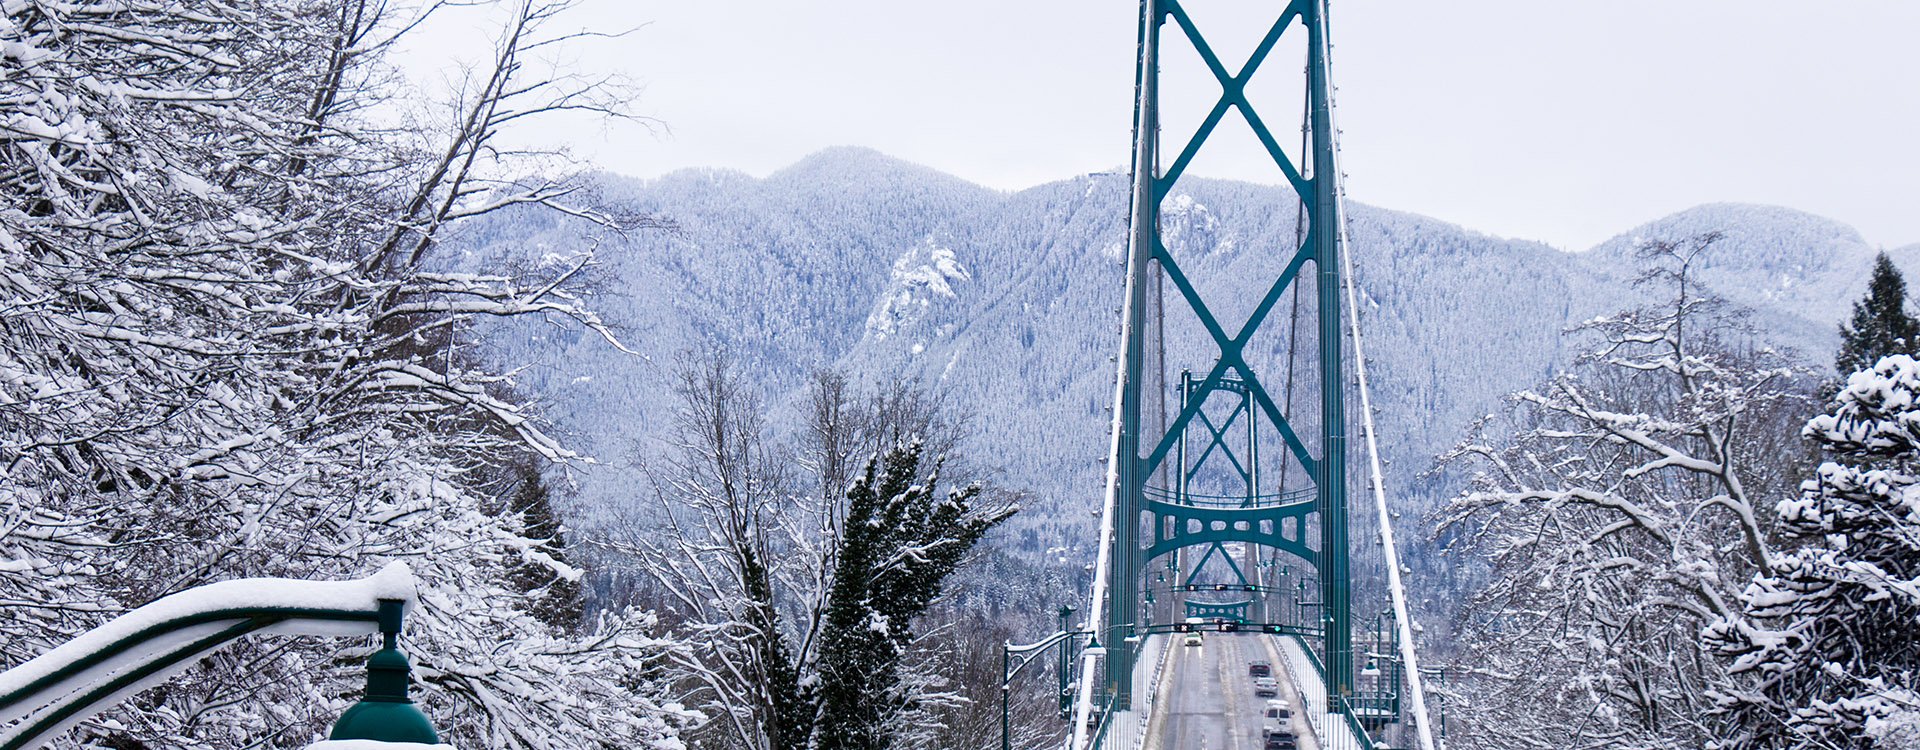 A View of Lions Gate Bridge covered in snow